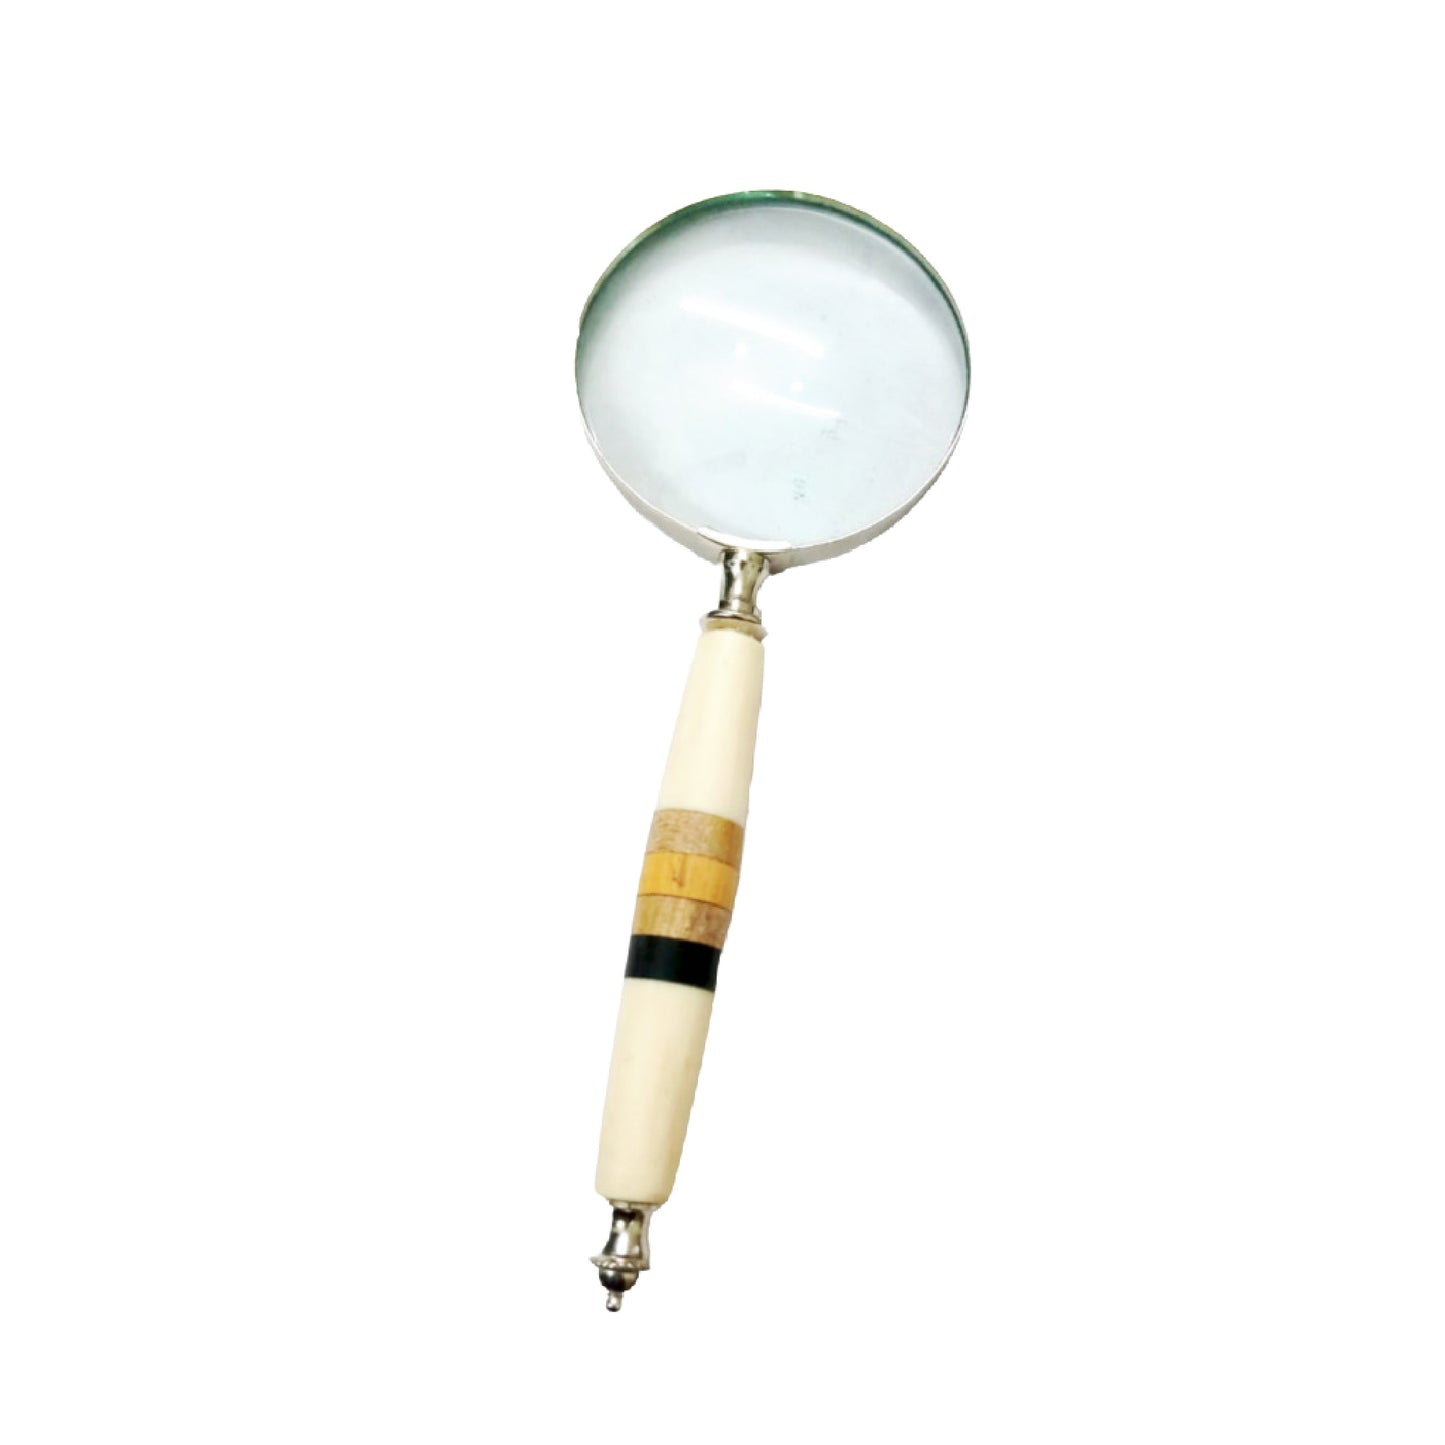 Magnifying glass hand lens in a vintage nautical style 10 inches long. 4 inch diameter lens with a marquetry design handle. Comes gift boxed